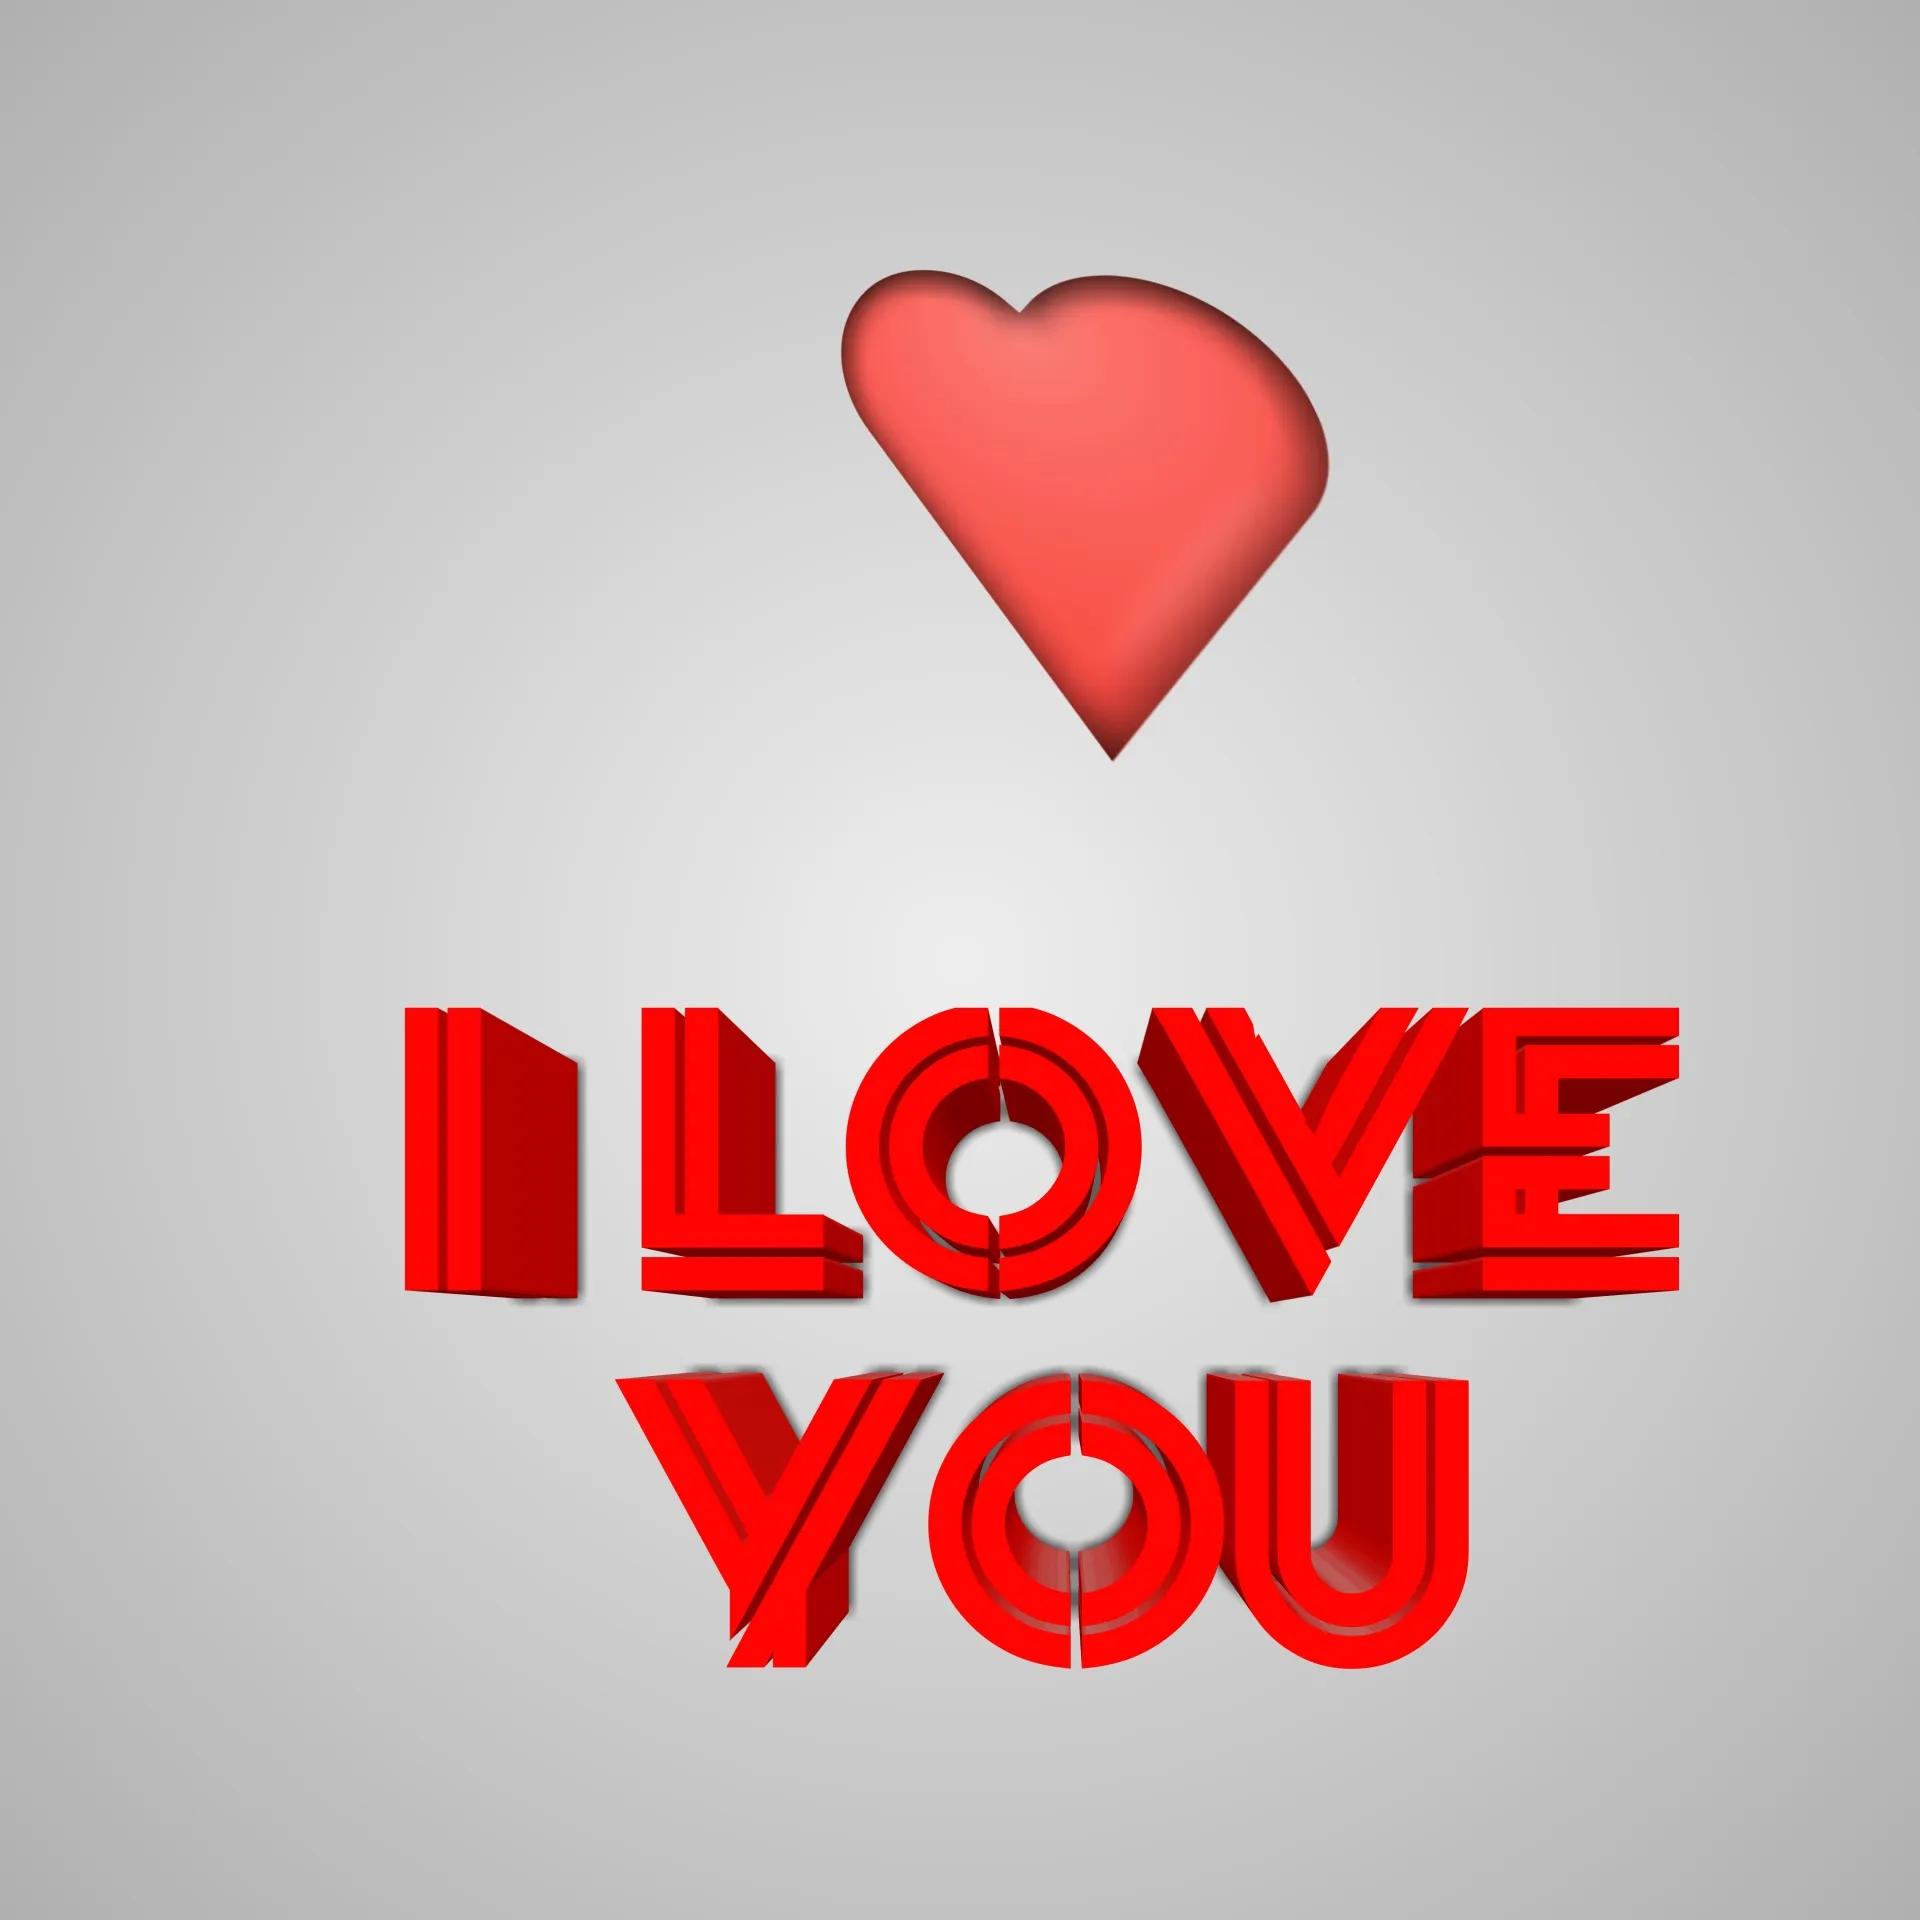 I Love You 2 Free Stock Photo - Public Domain Pictures